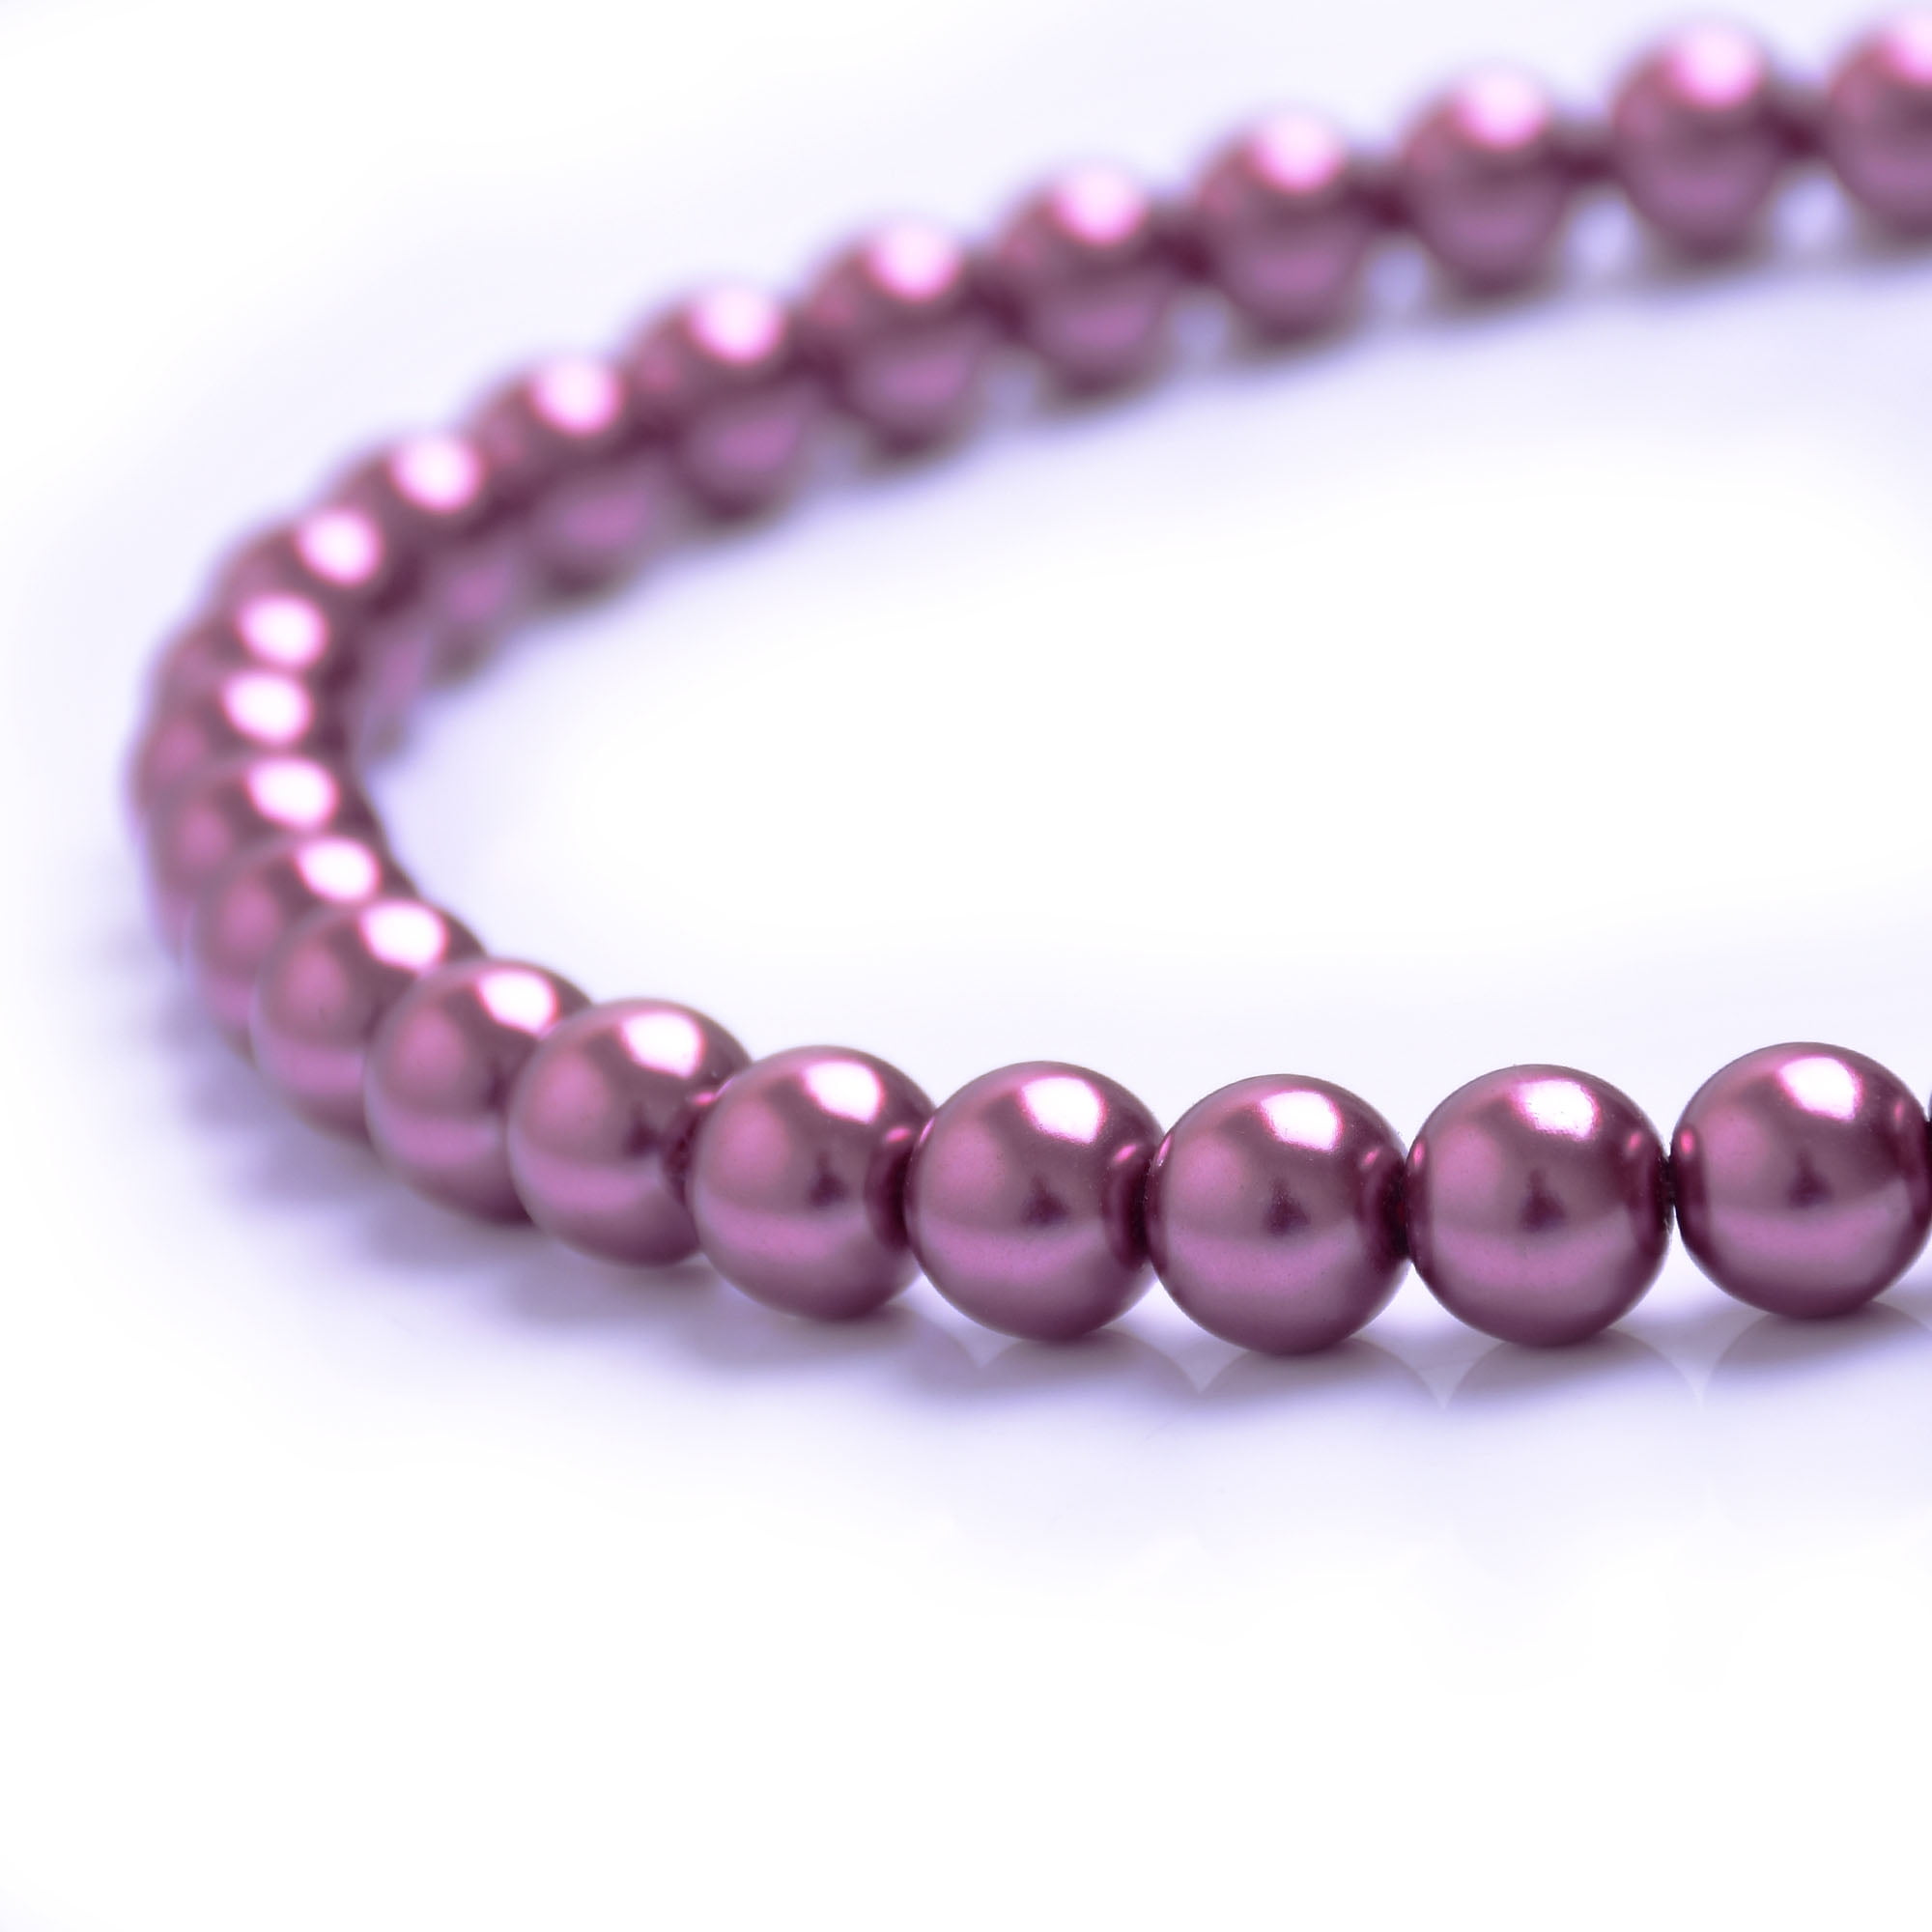 Pearlized 6mm x 100 or 8mm x 50 Round 4mm x 200 Lilac Glass Pearl Beads